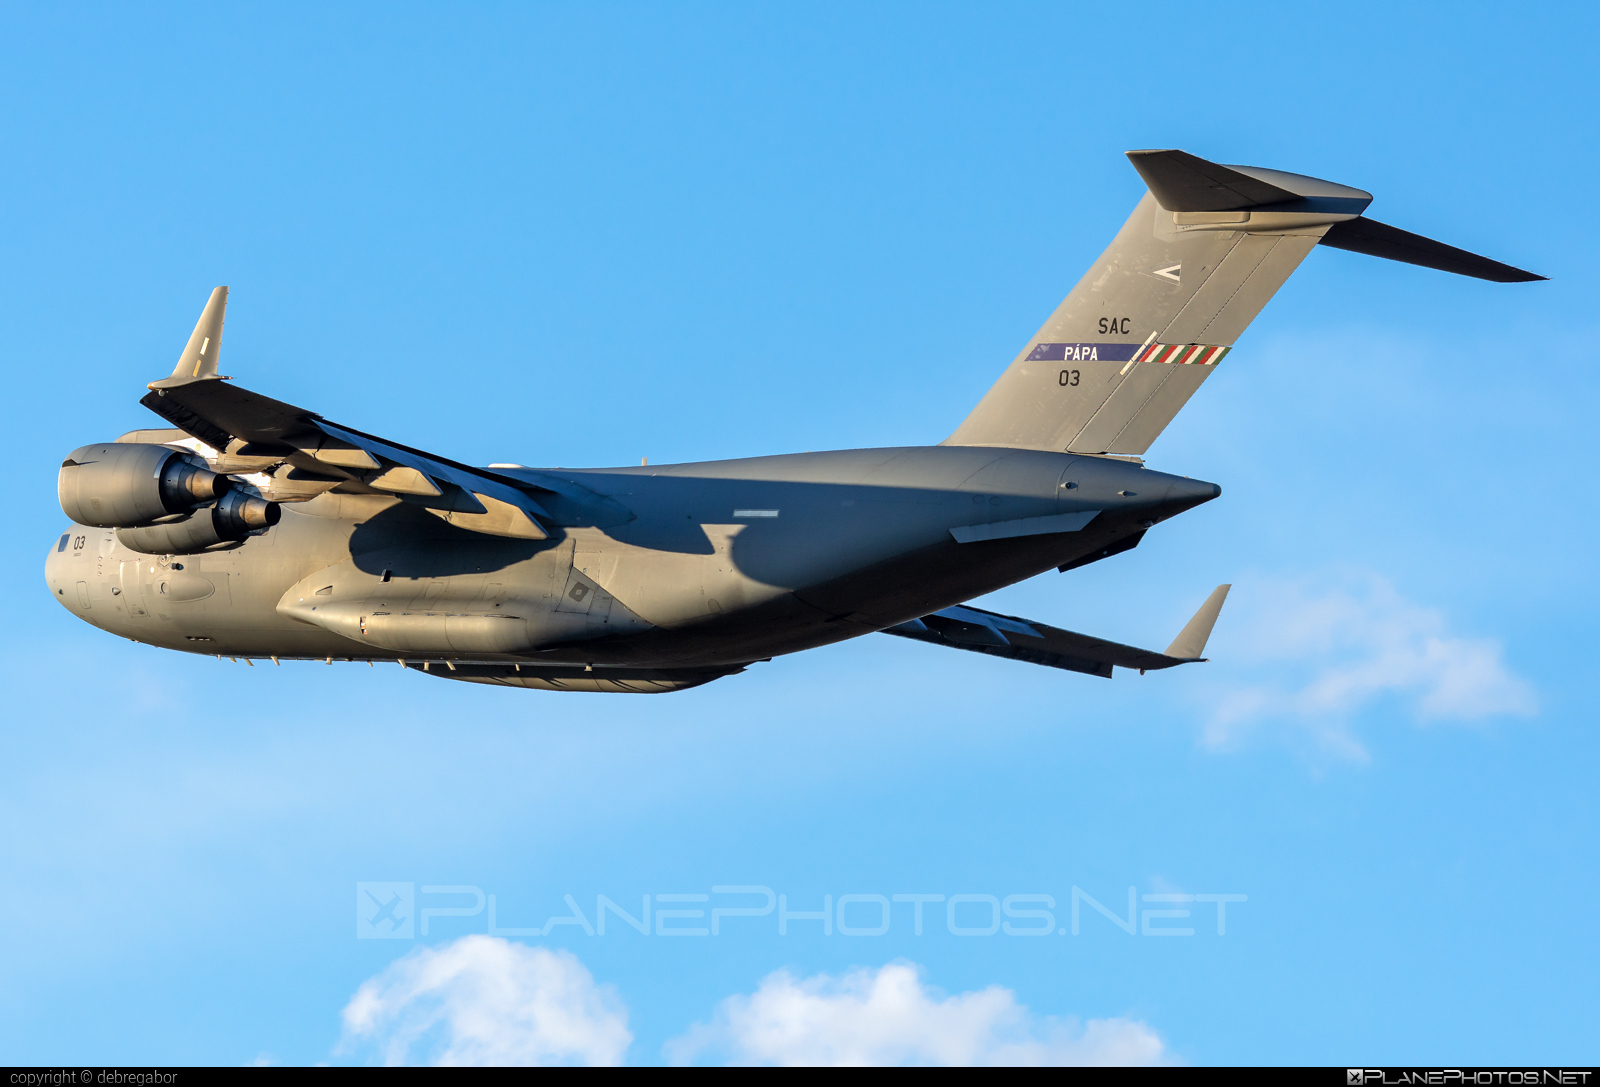 Boeing C-17A Globemaster III - 03 operated by NATO Strategic Airlift Capability (SAC) #boeing #c17 #c17globemaster #globemaster #globemasteriii #natostrategicairliftcapability #strategicairliftcapability